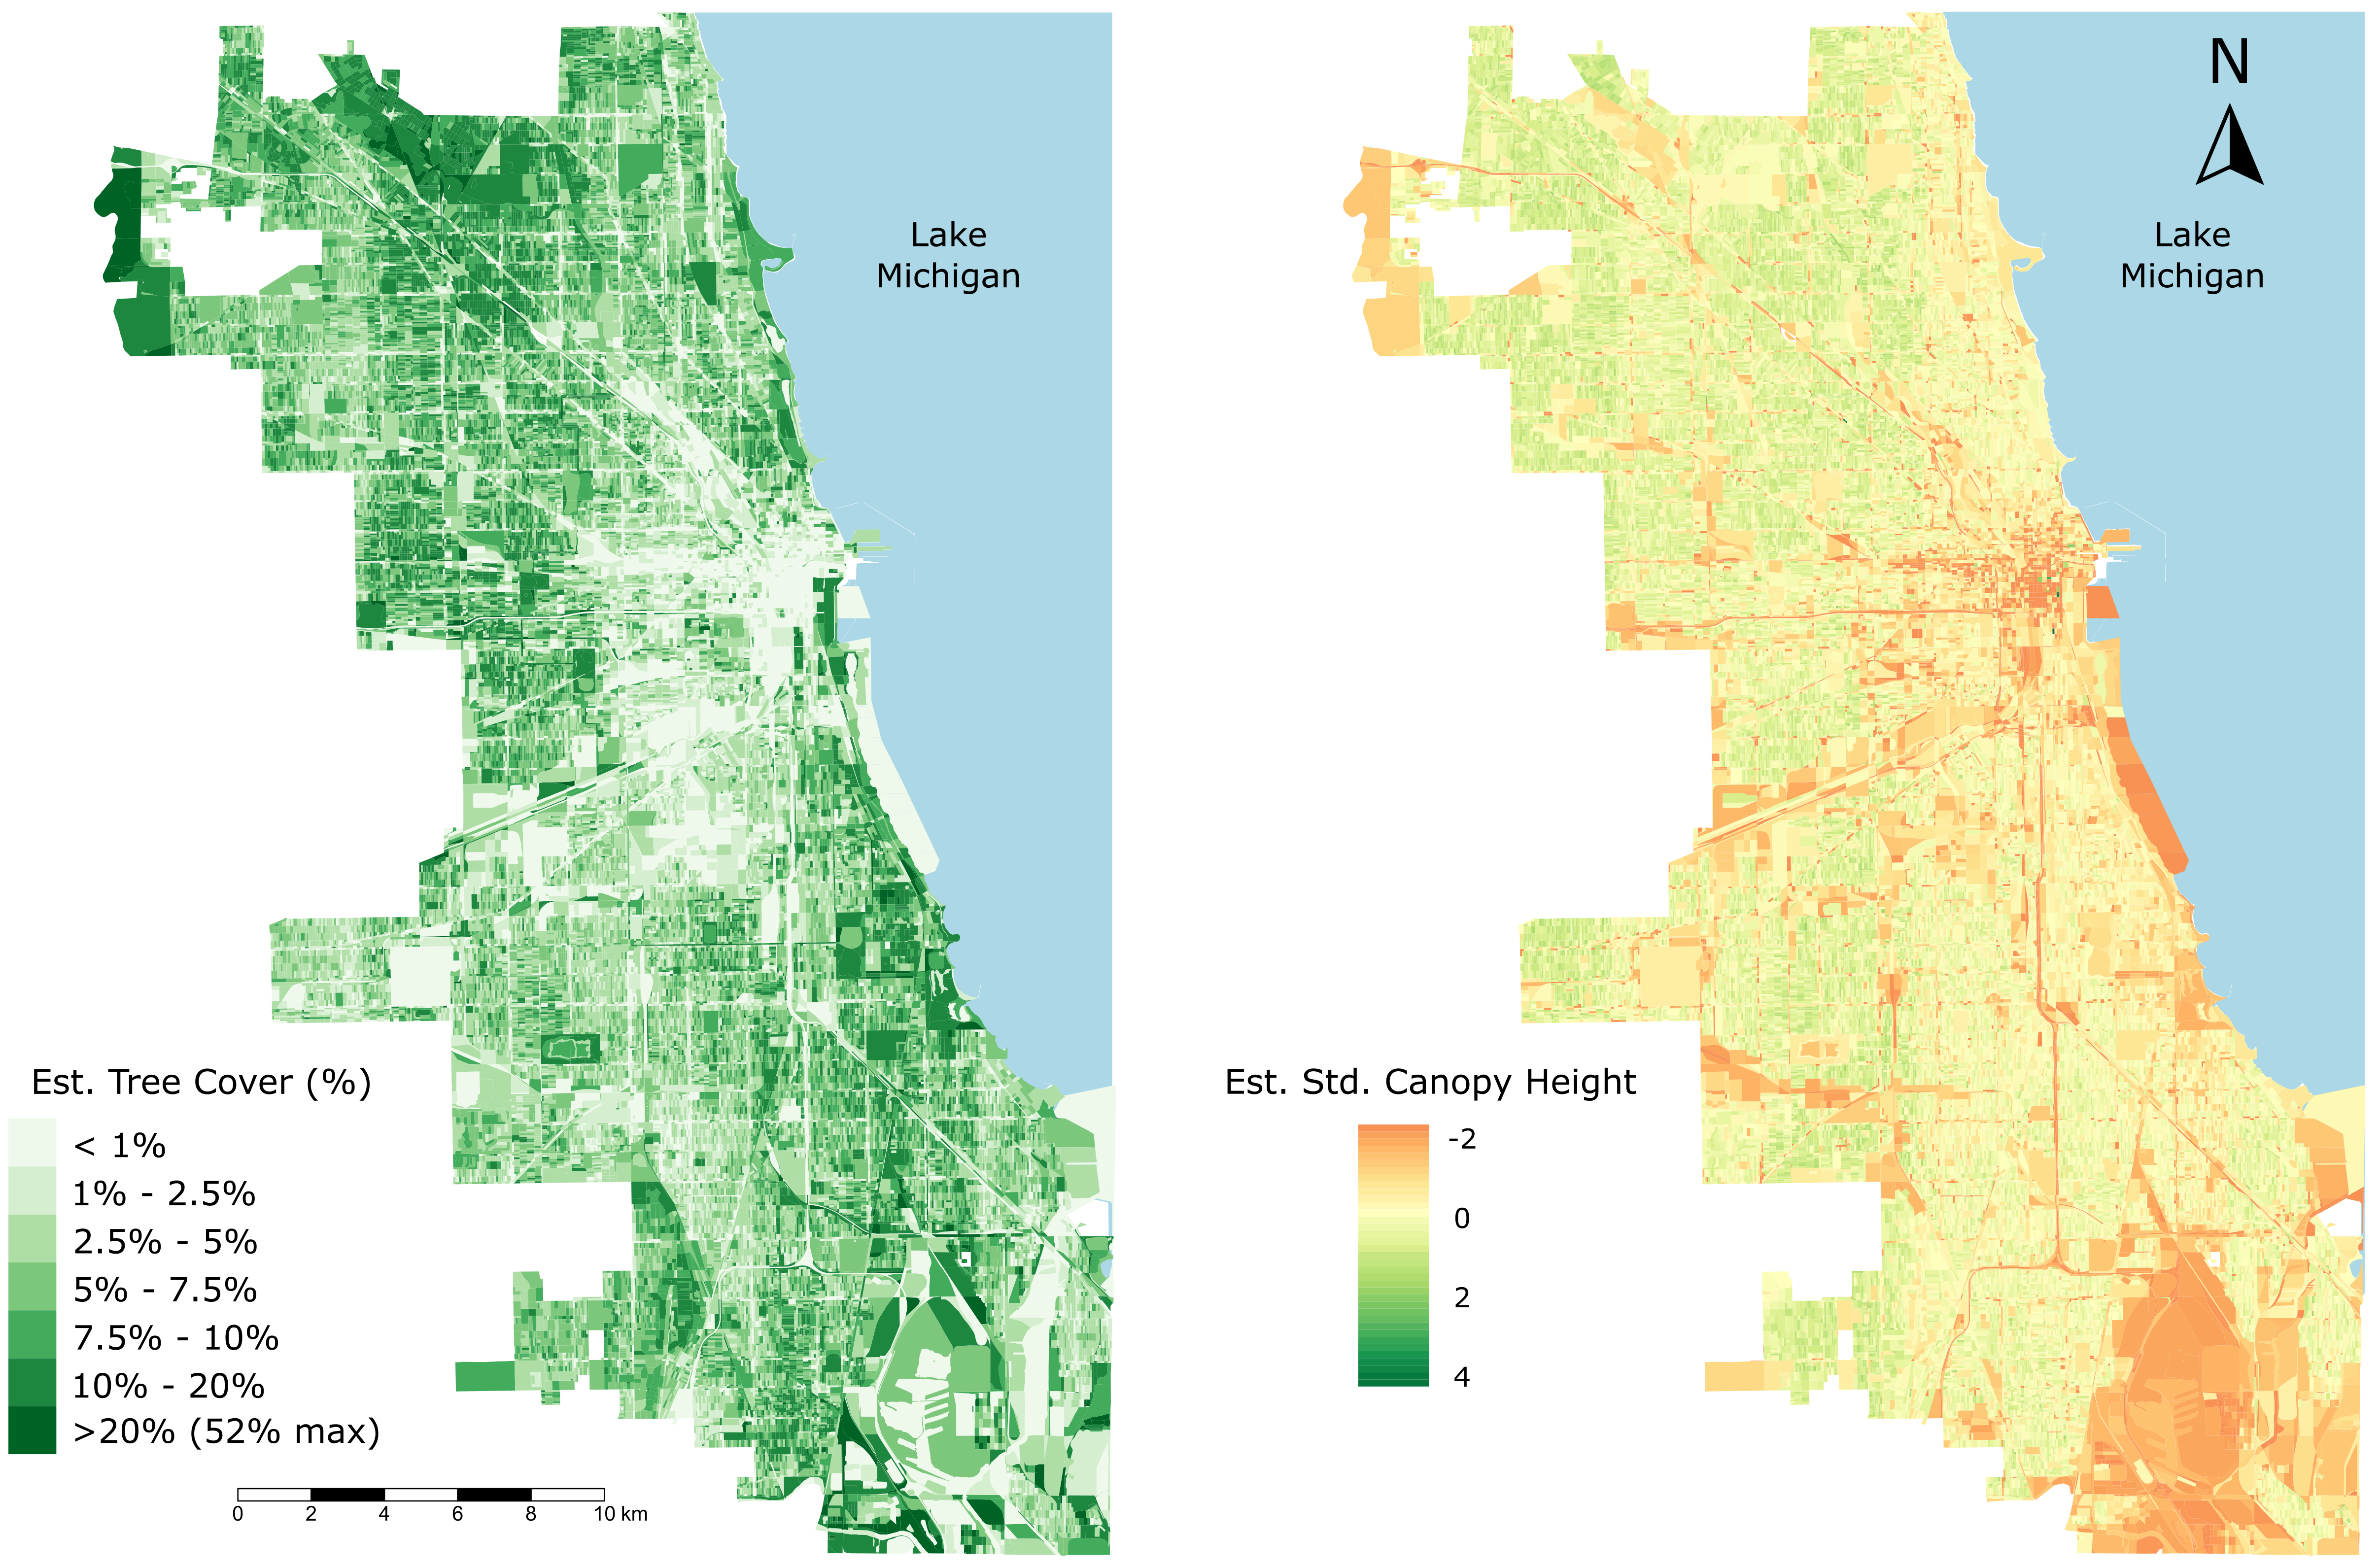 Maps of estimated 2019 tree cover and canopy height in Chicago 